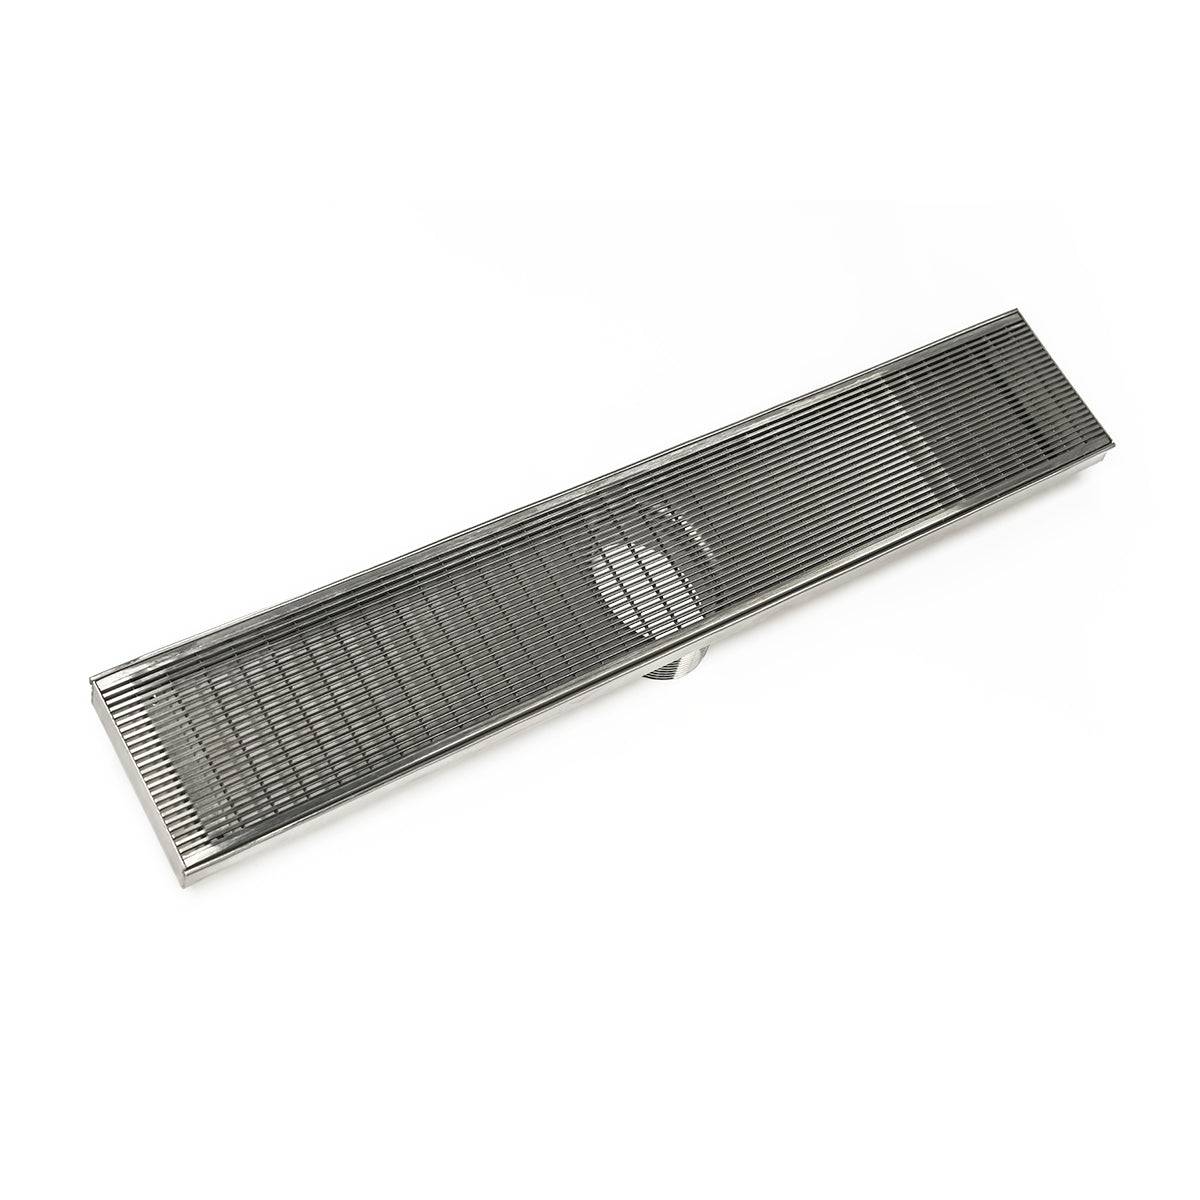 Infinity Drain 36" FX Series High Flow Fixed Length Linear Drain Kit with Wedge Wire Grate with PVC Drain Body